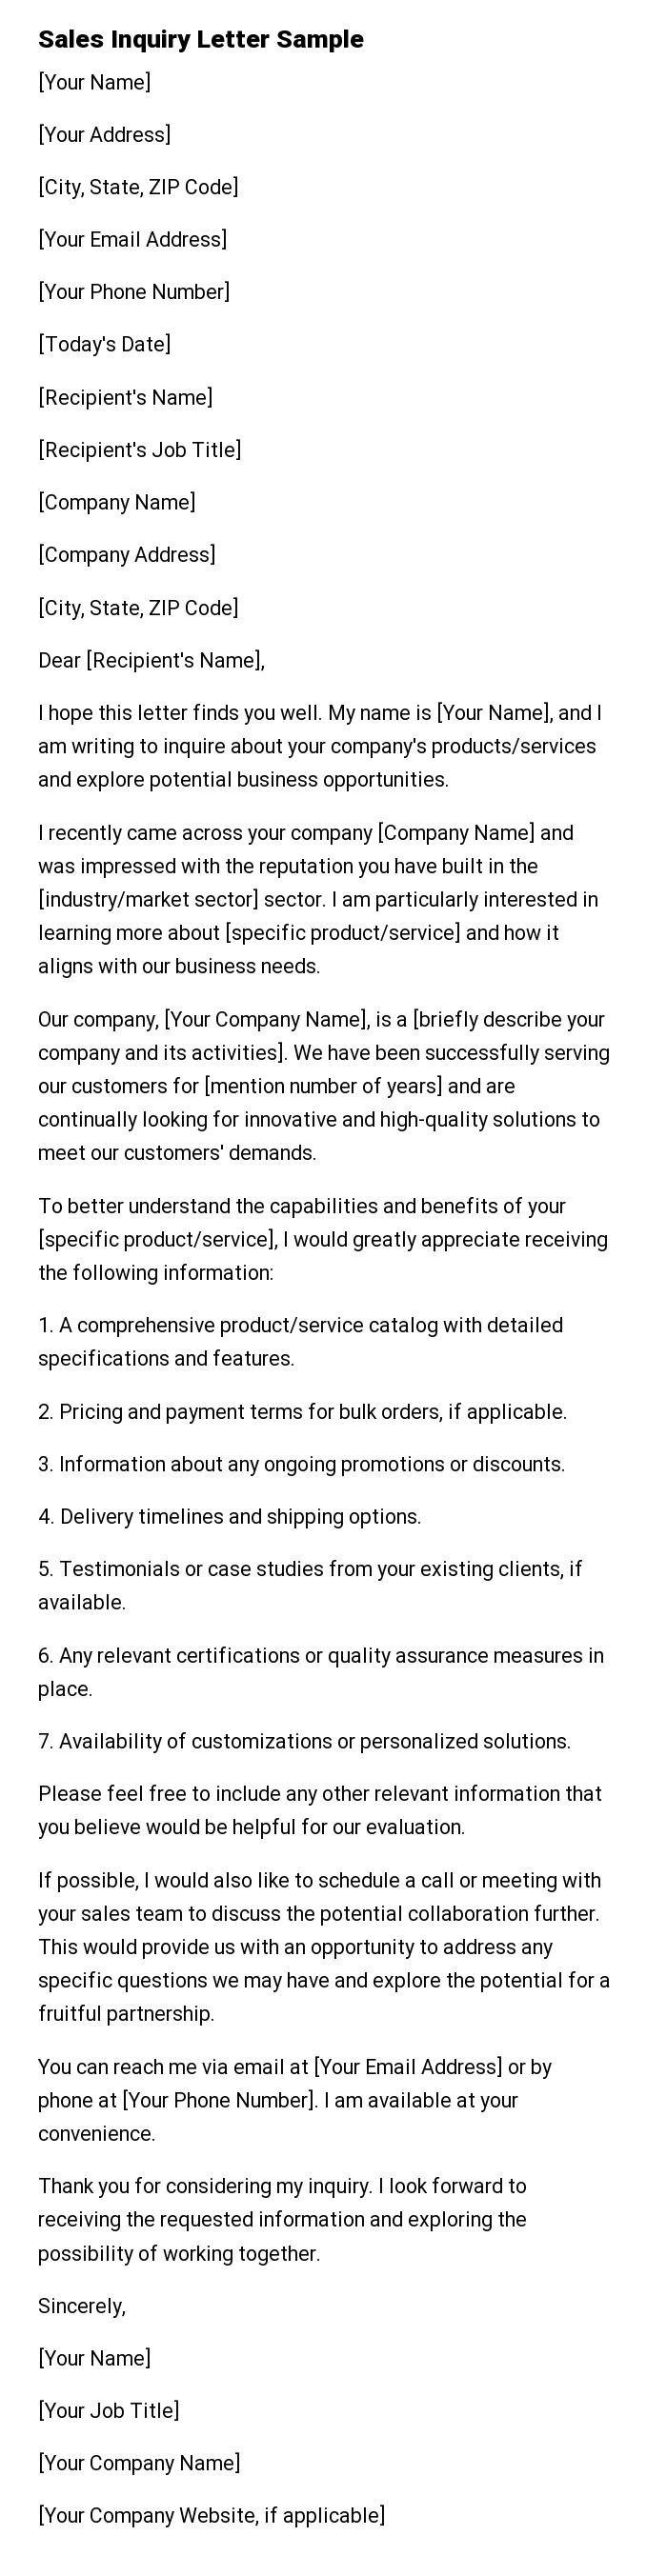 Sales Inquiry Letter Sample